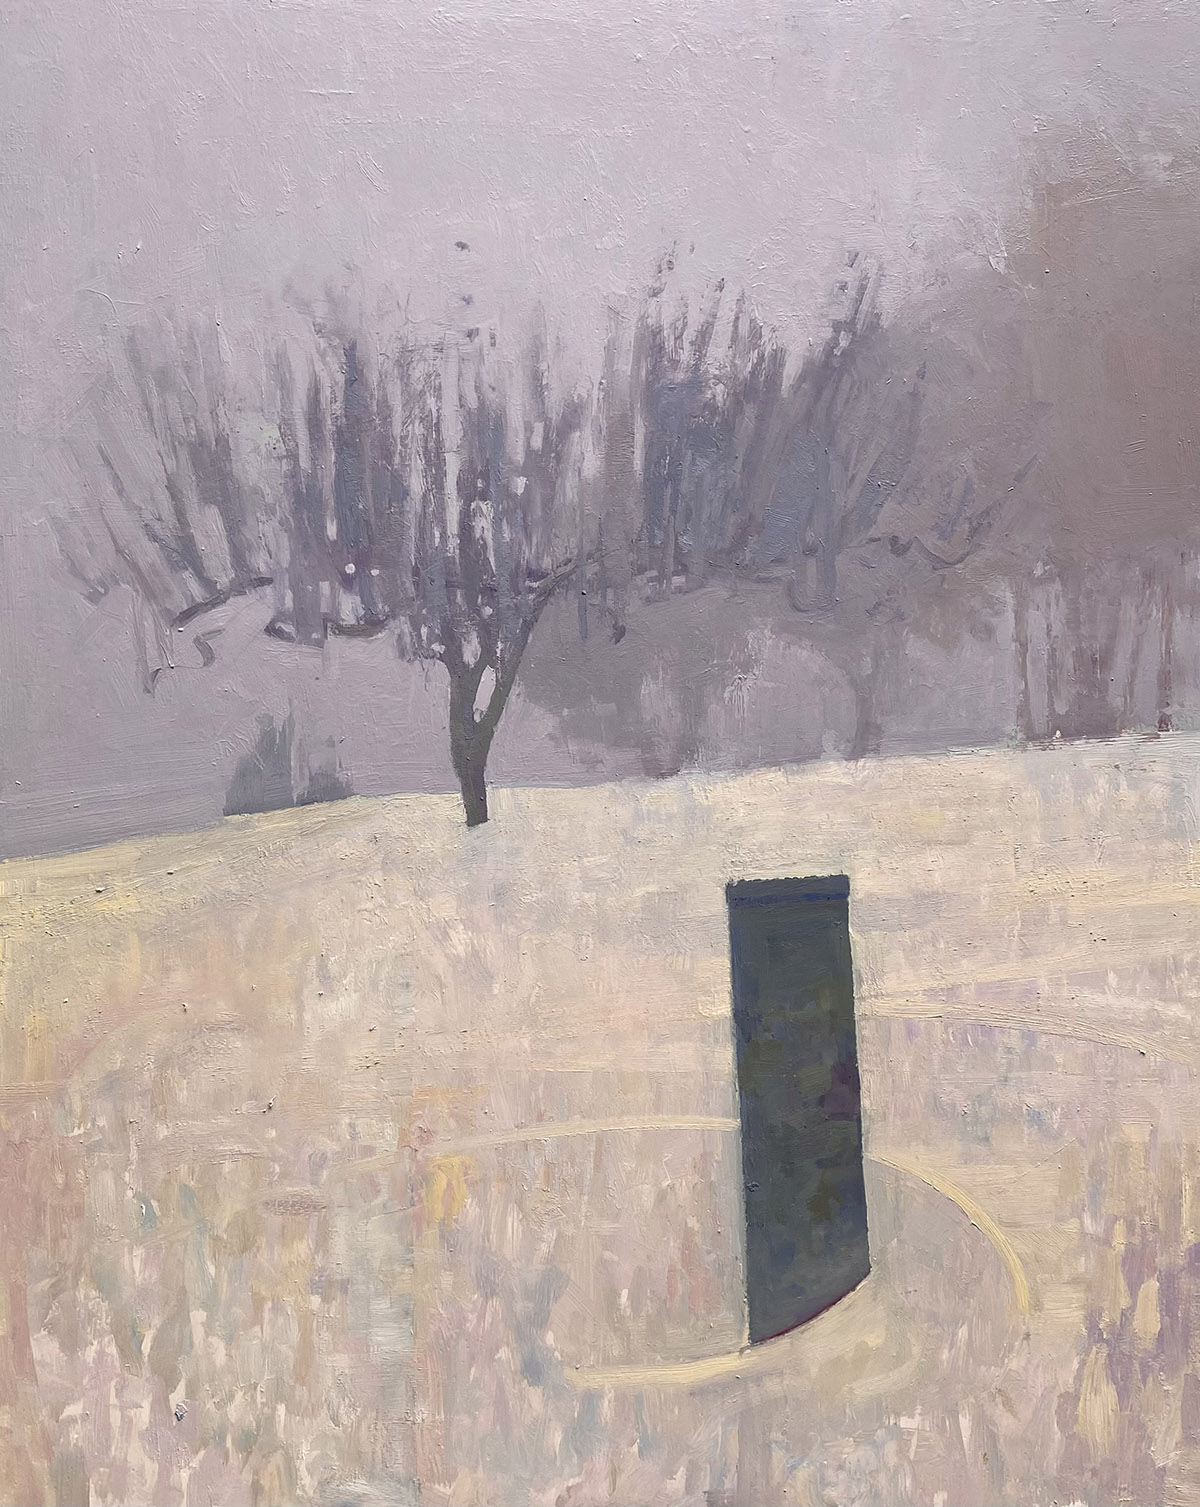 oil painting of winter snow scene with bare trees in distance; lone fence post in foreground